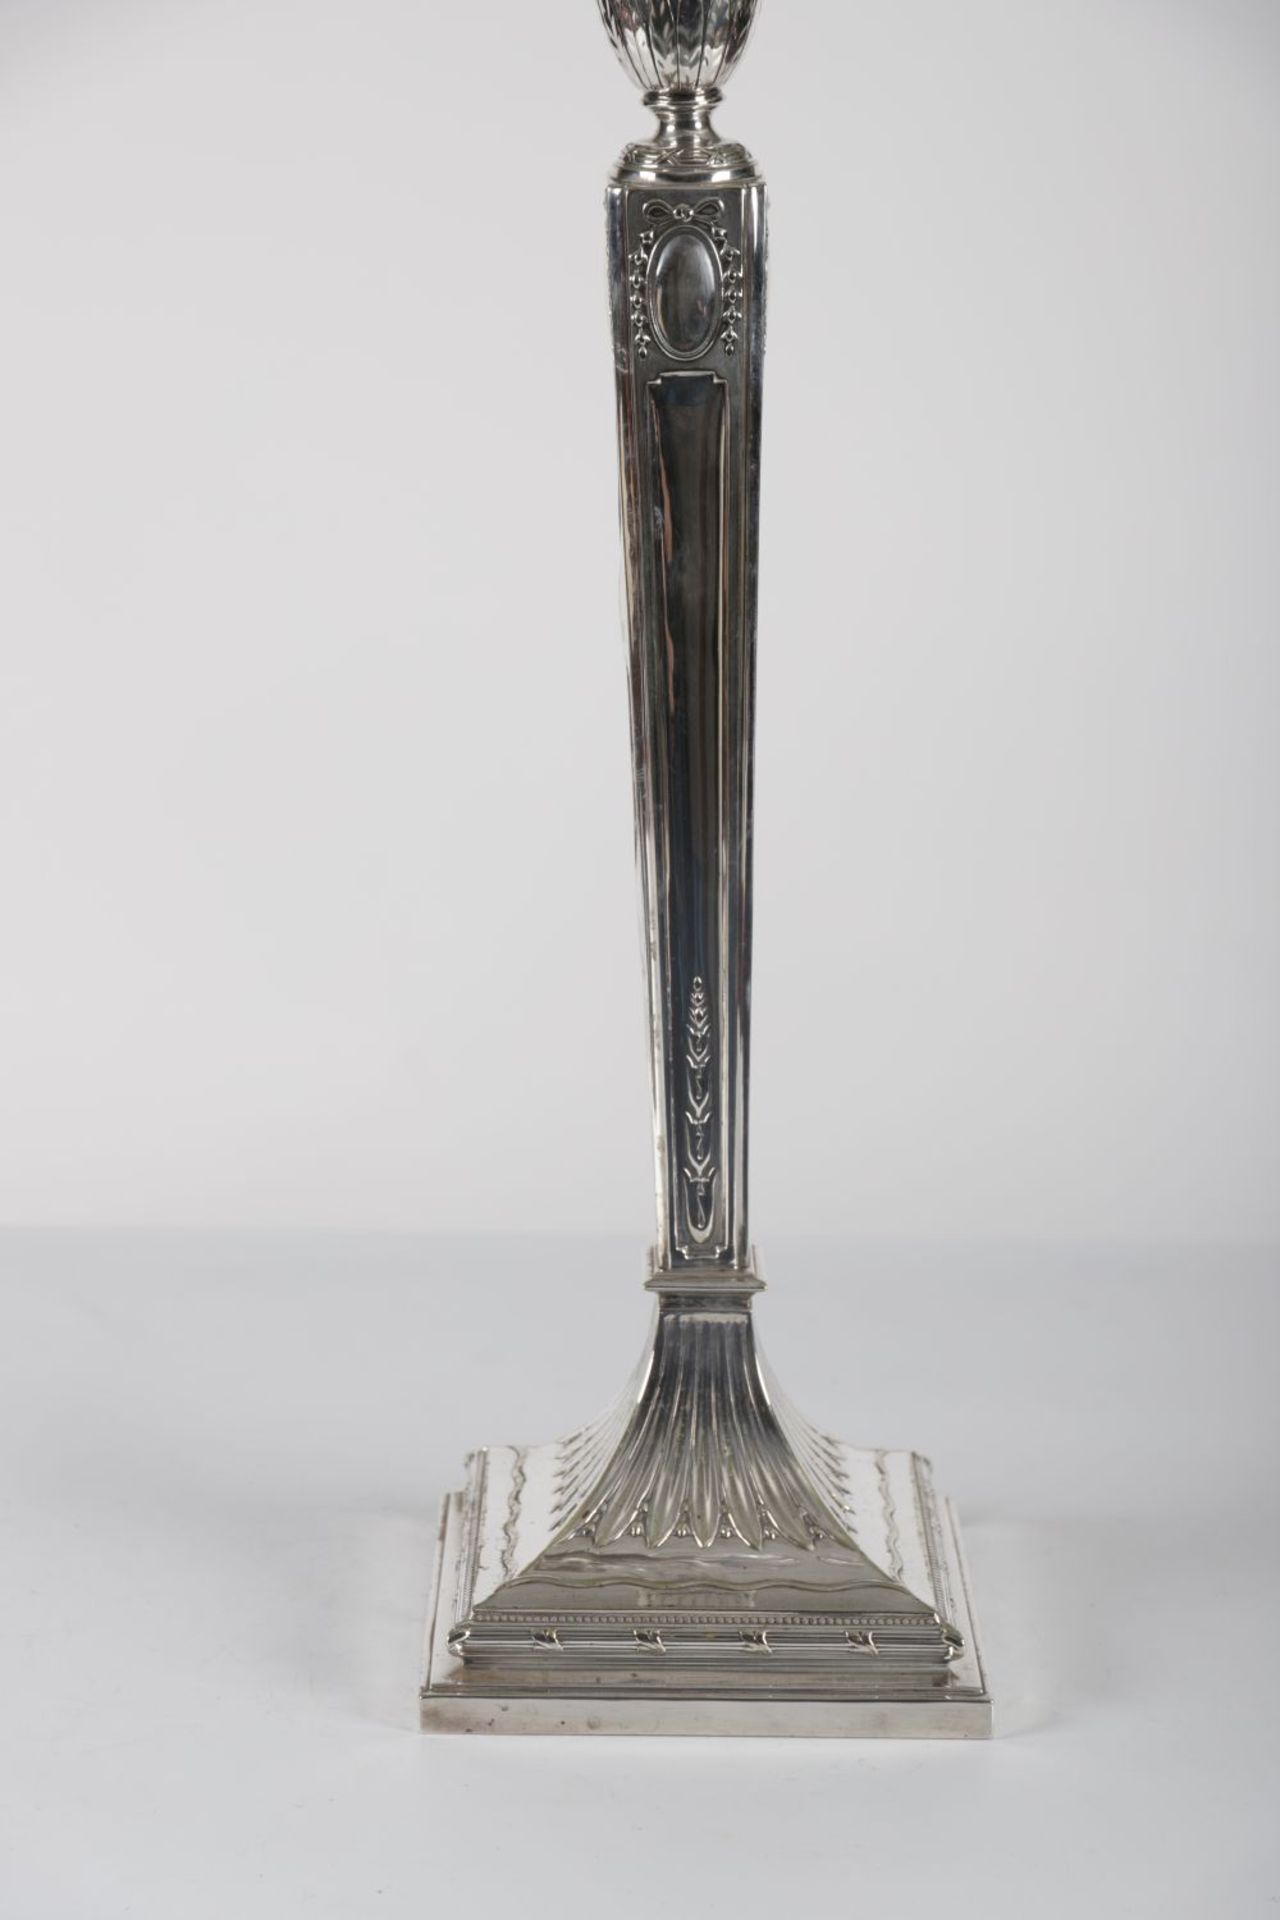 VICTORIAN SILVER-STEMMED OIL LAMP - Image 3 of 3